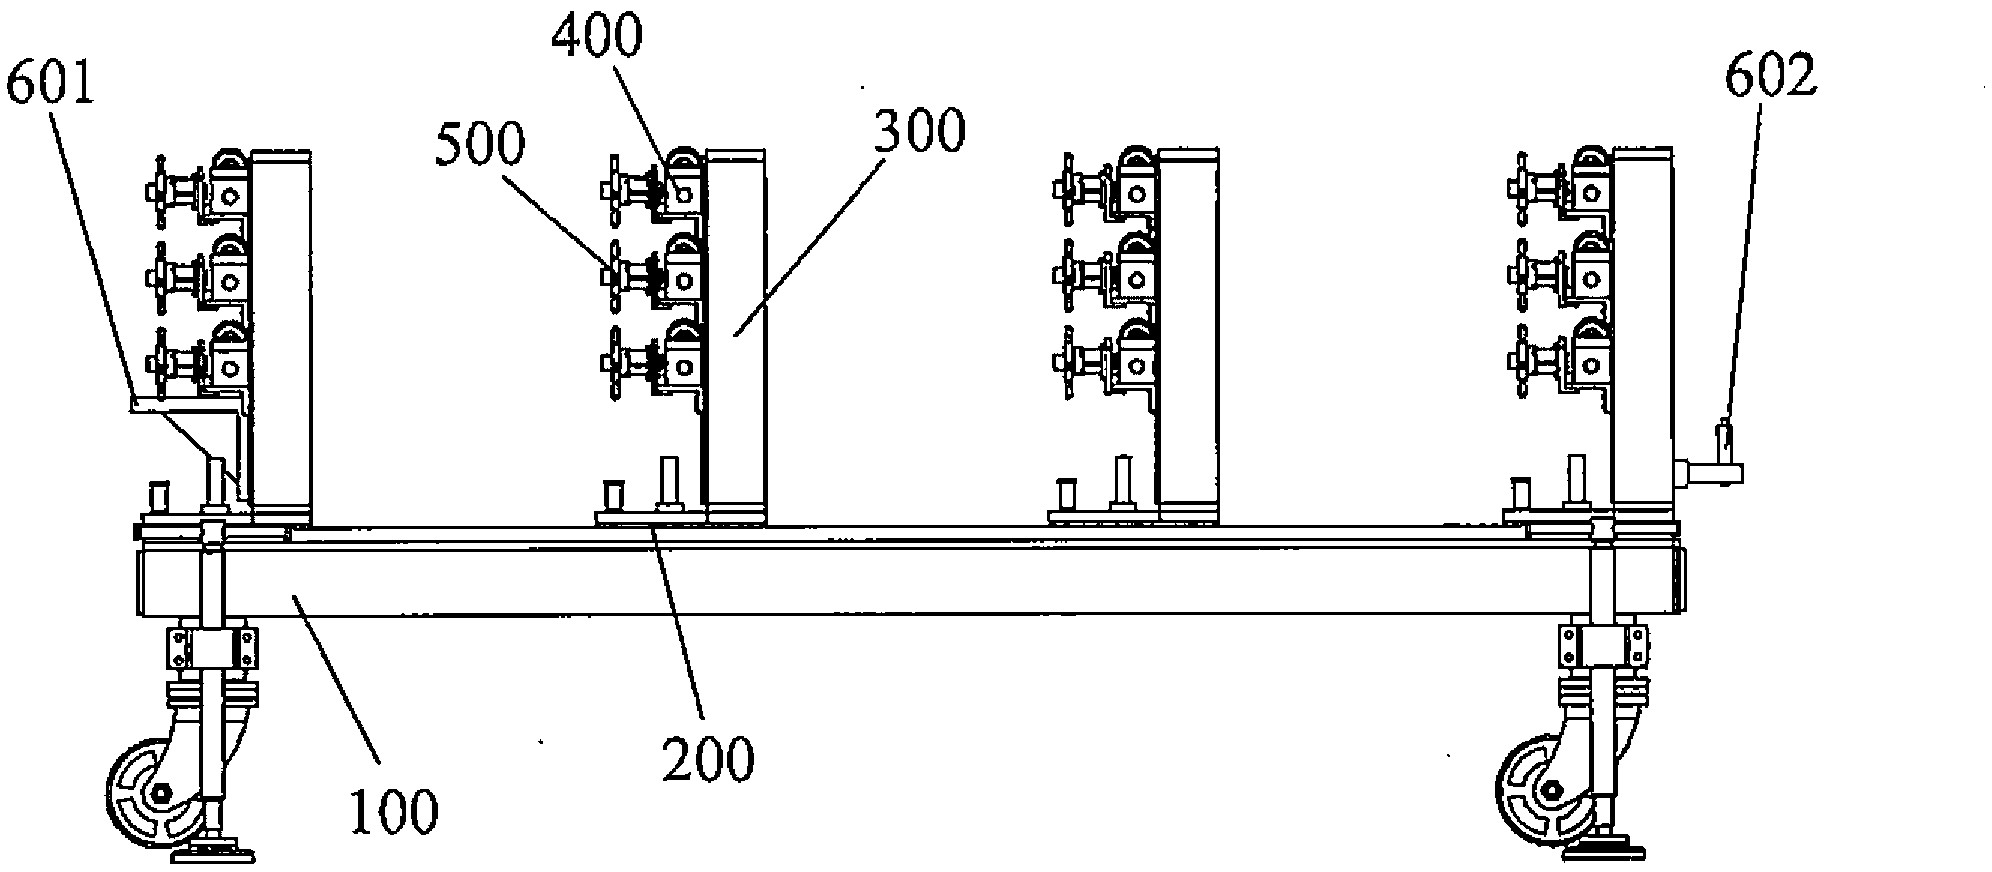 Clamping tool for trimming wing leading edge covering